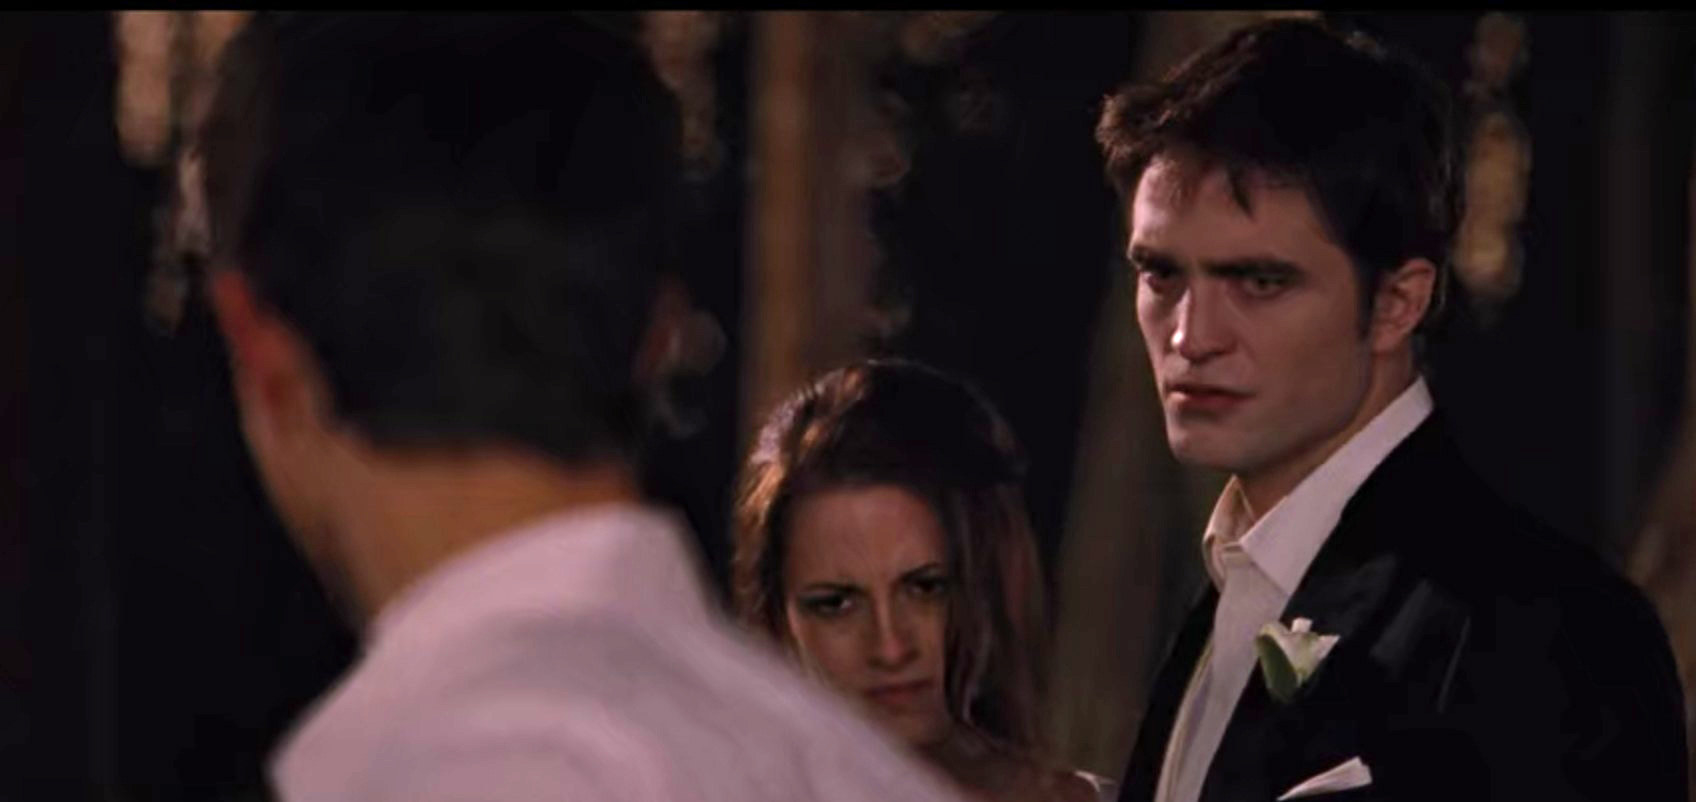 Edward furrows his brows in anger at Jacob while Bella looks forward, pain in her eyes